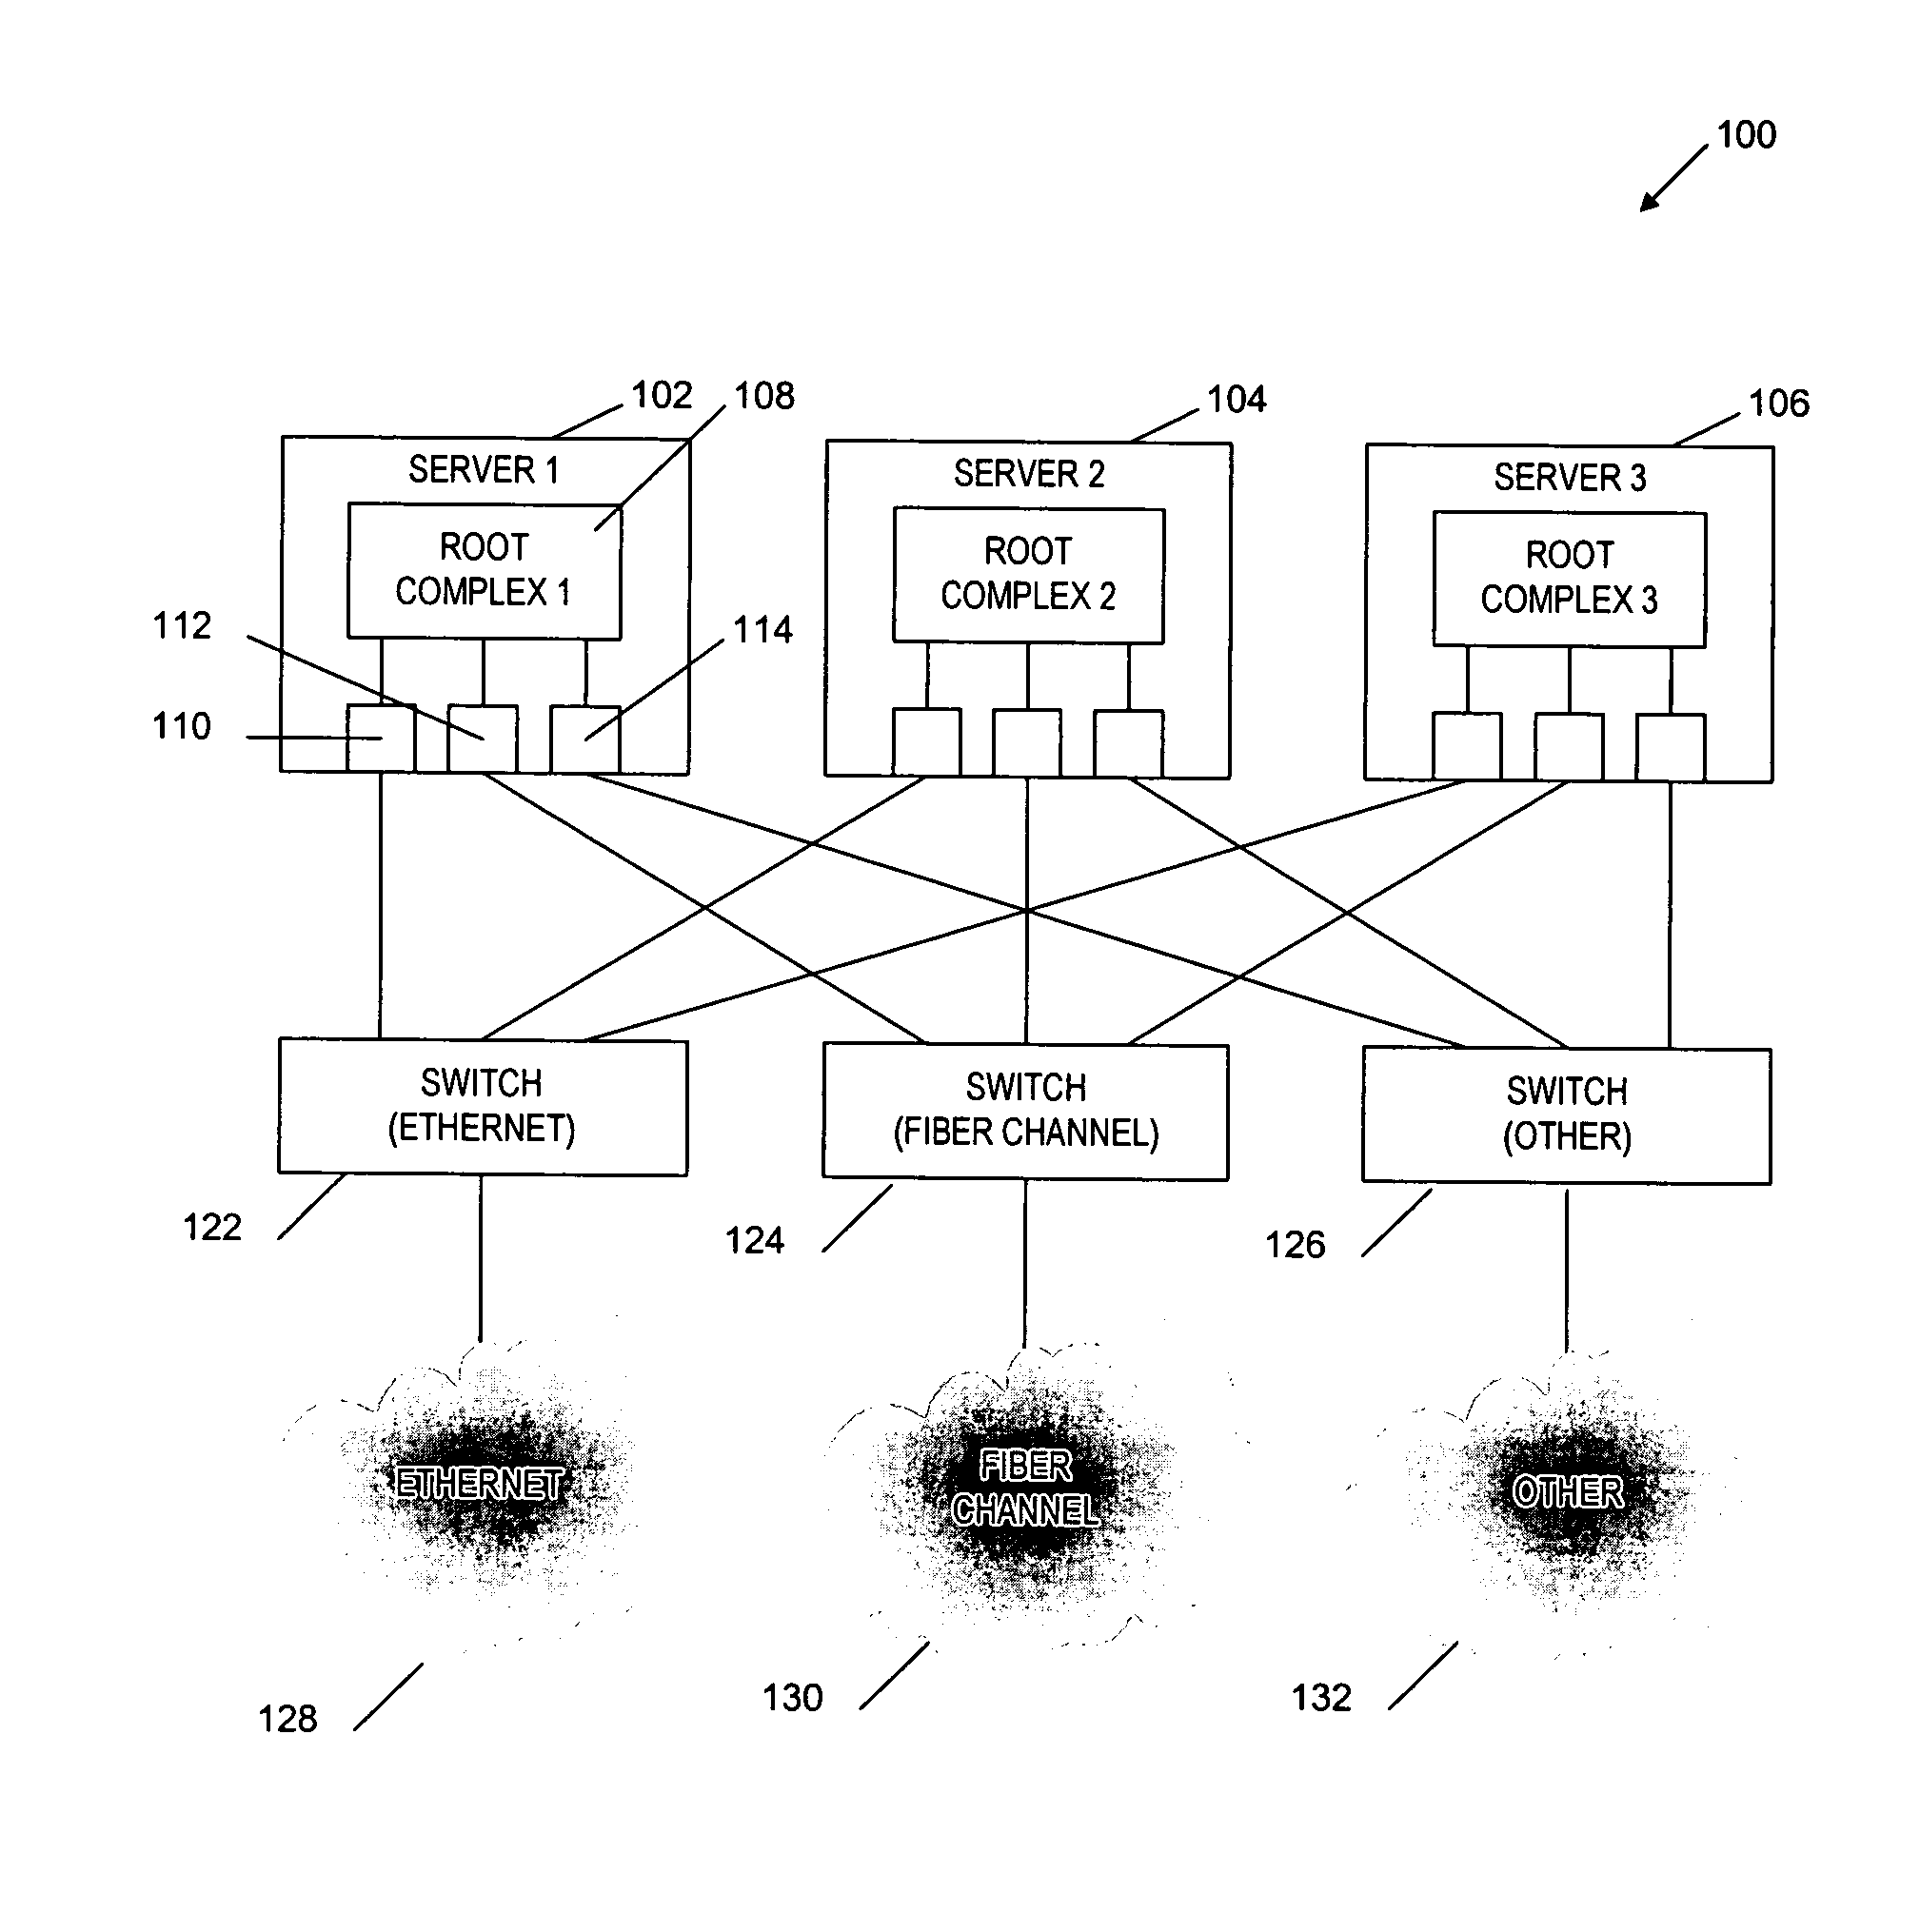 Apparatus and method for port polarity initialization in a shared I/O device